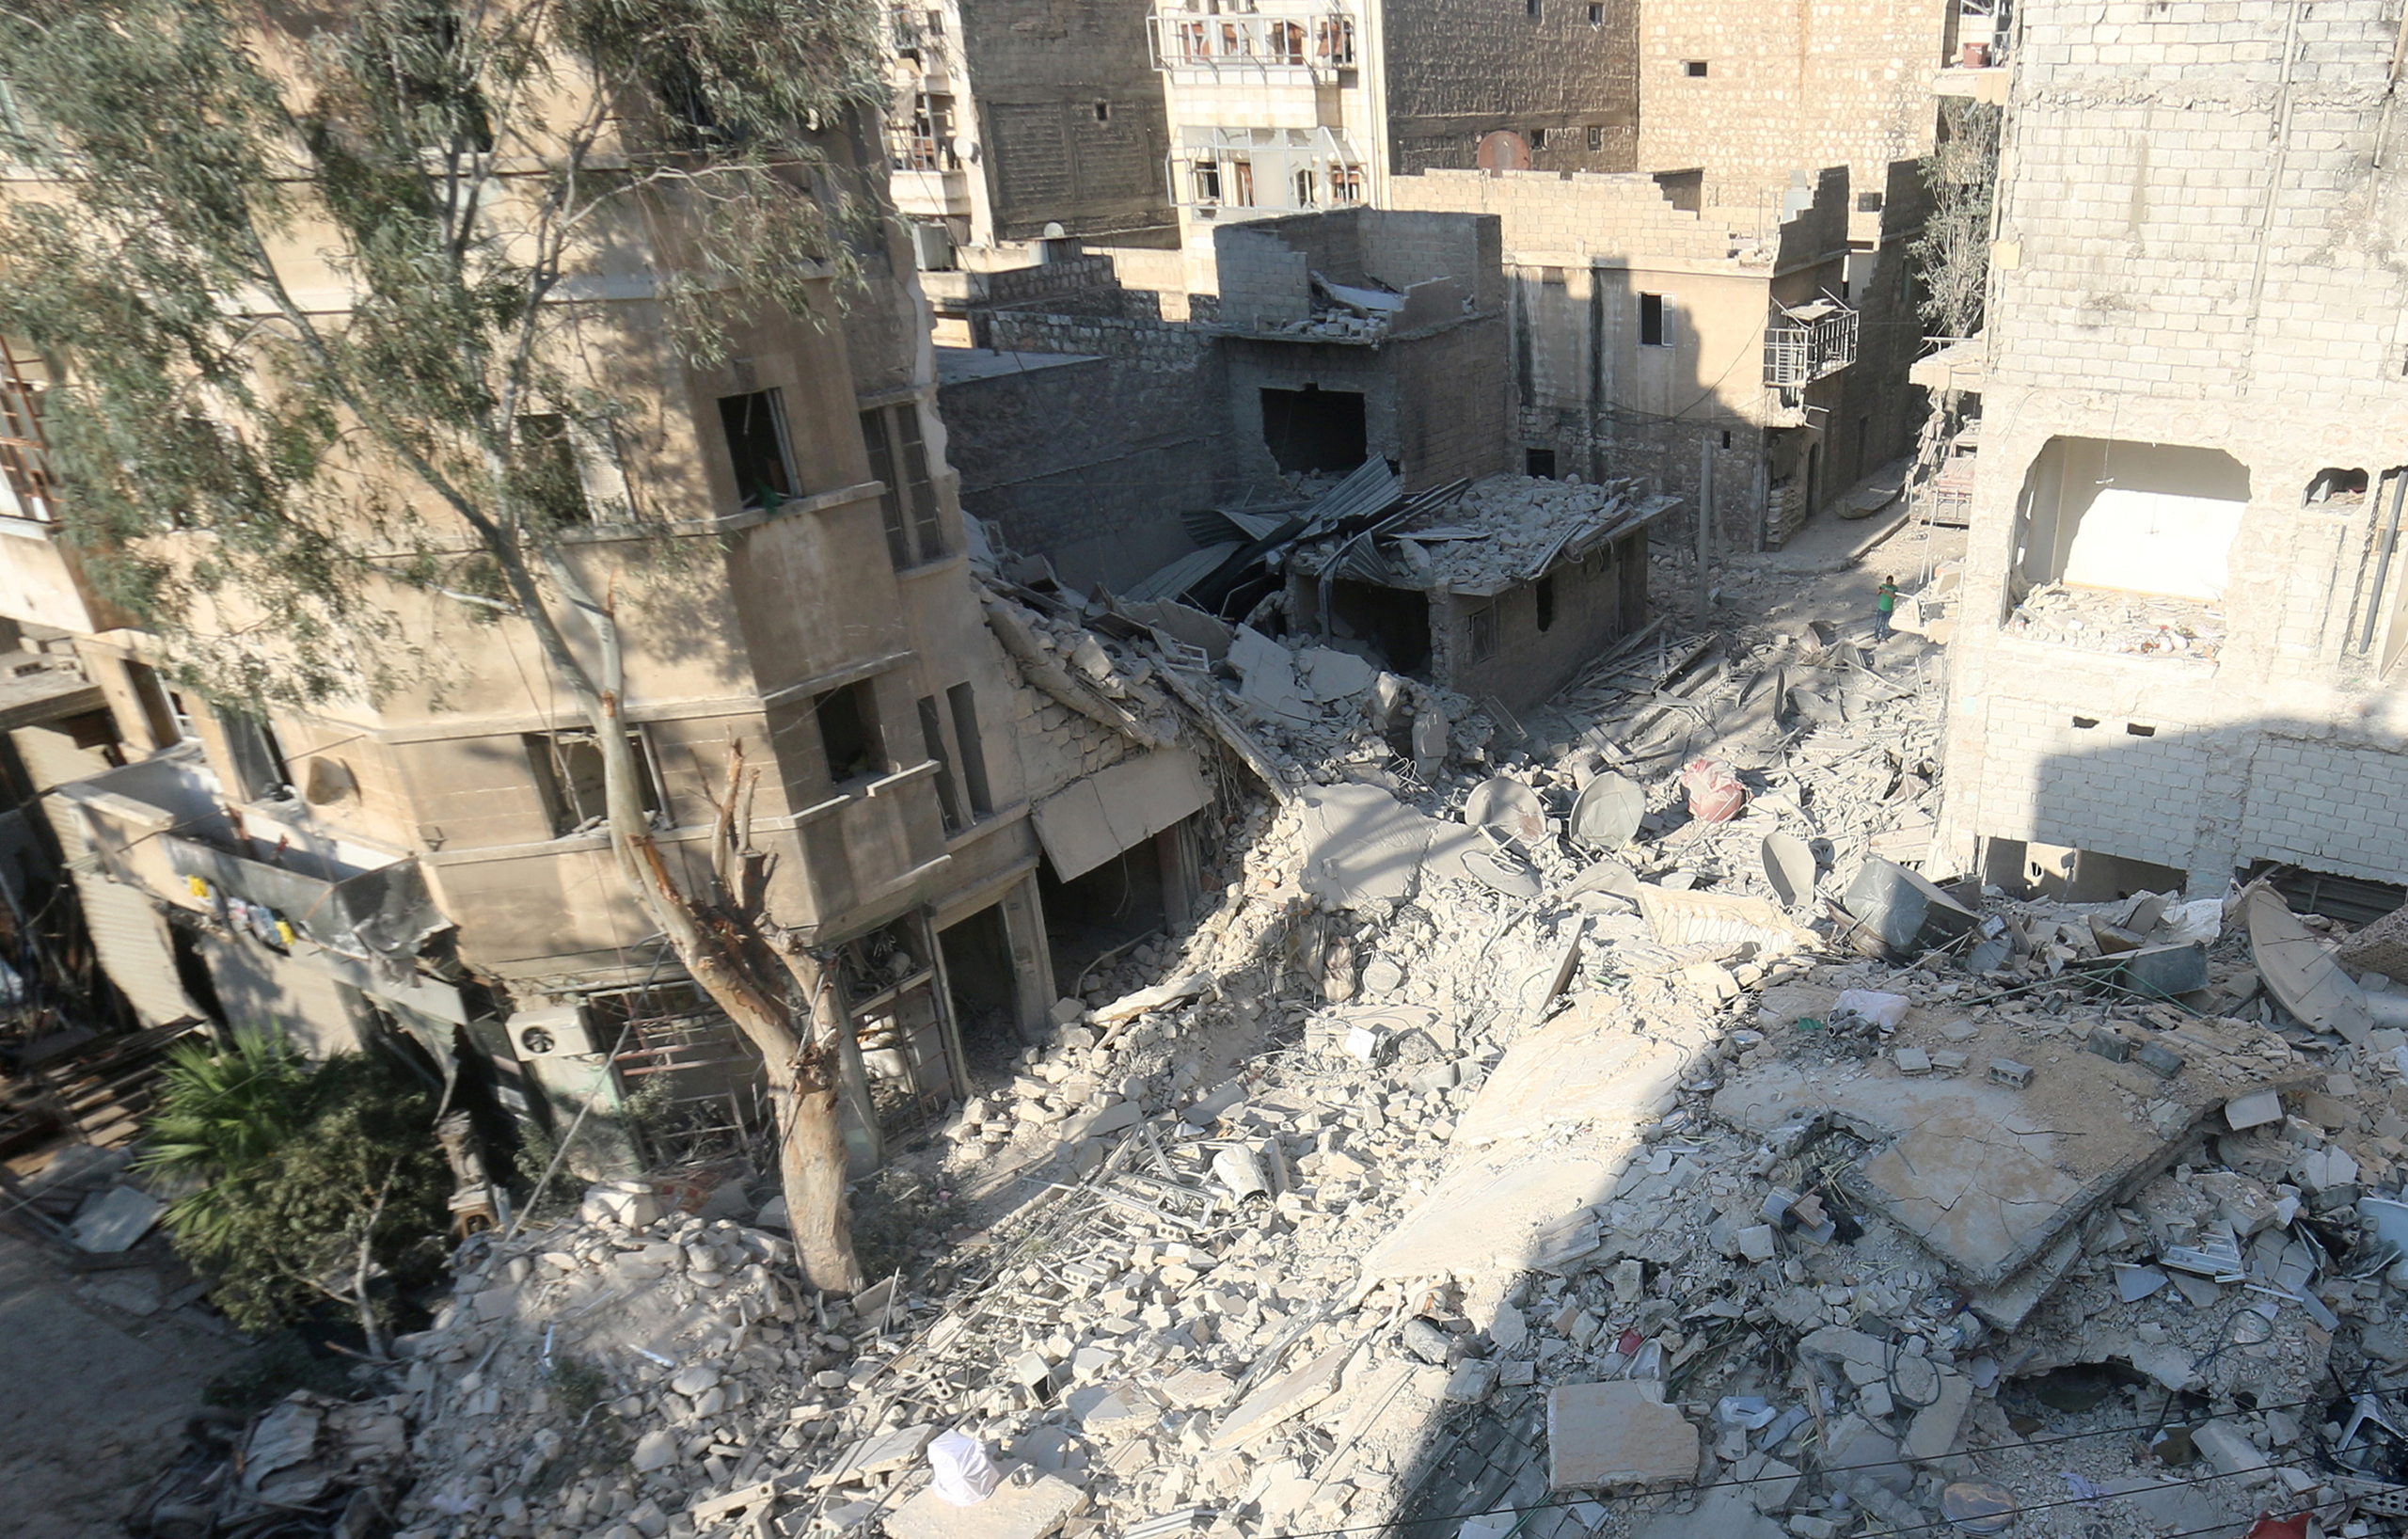 A general view shows the site of the Aug. 17 airstrike where five-year-old Omran Daqneesh and his family were injured in the rebel-held Qaterji neighborhood of Aleppo, Syria, on Aug. 18, 2016. The Daqneesh family lived in the building on the left. (Abdalrhman Ismail—Reuters)